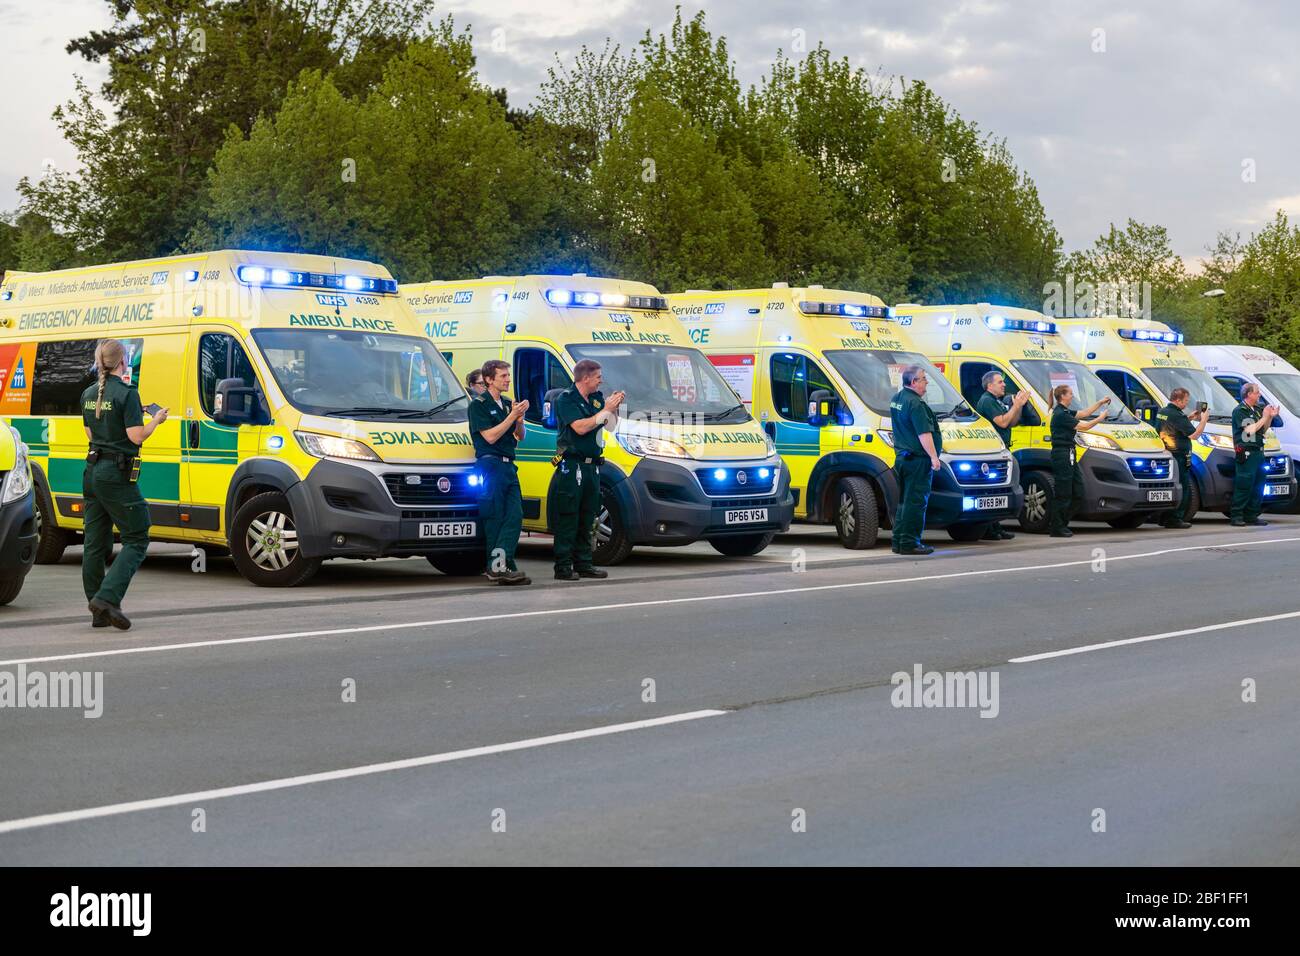 Clap for our carers at 8pm on Thursday. Ambulance crews applaud NHS hospital staff, UK. Clap for healthcare workers. Stock Photo